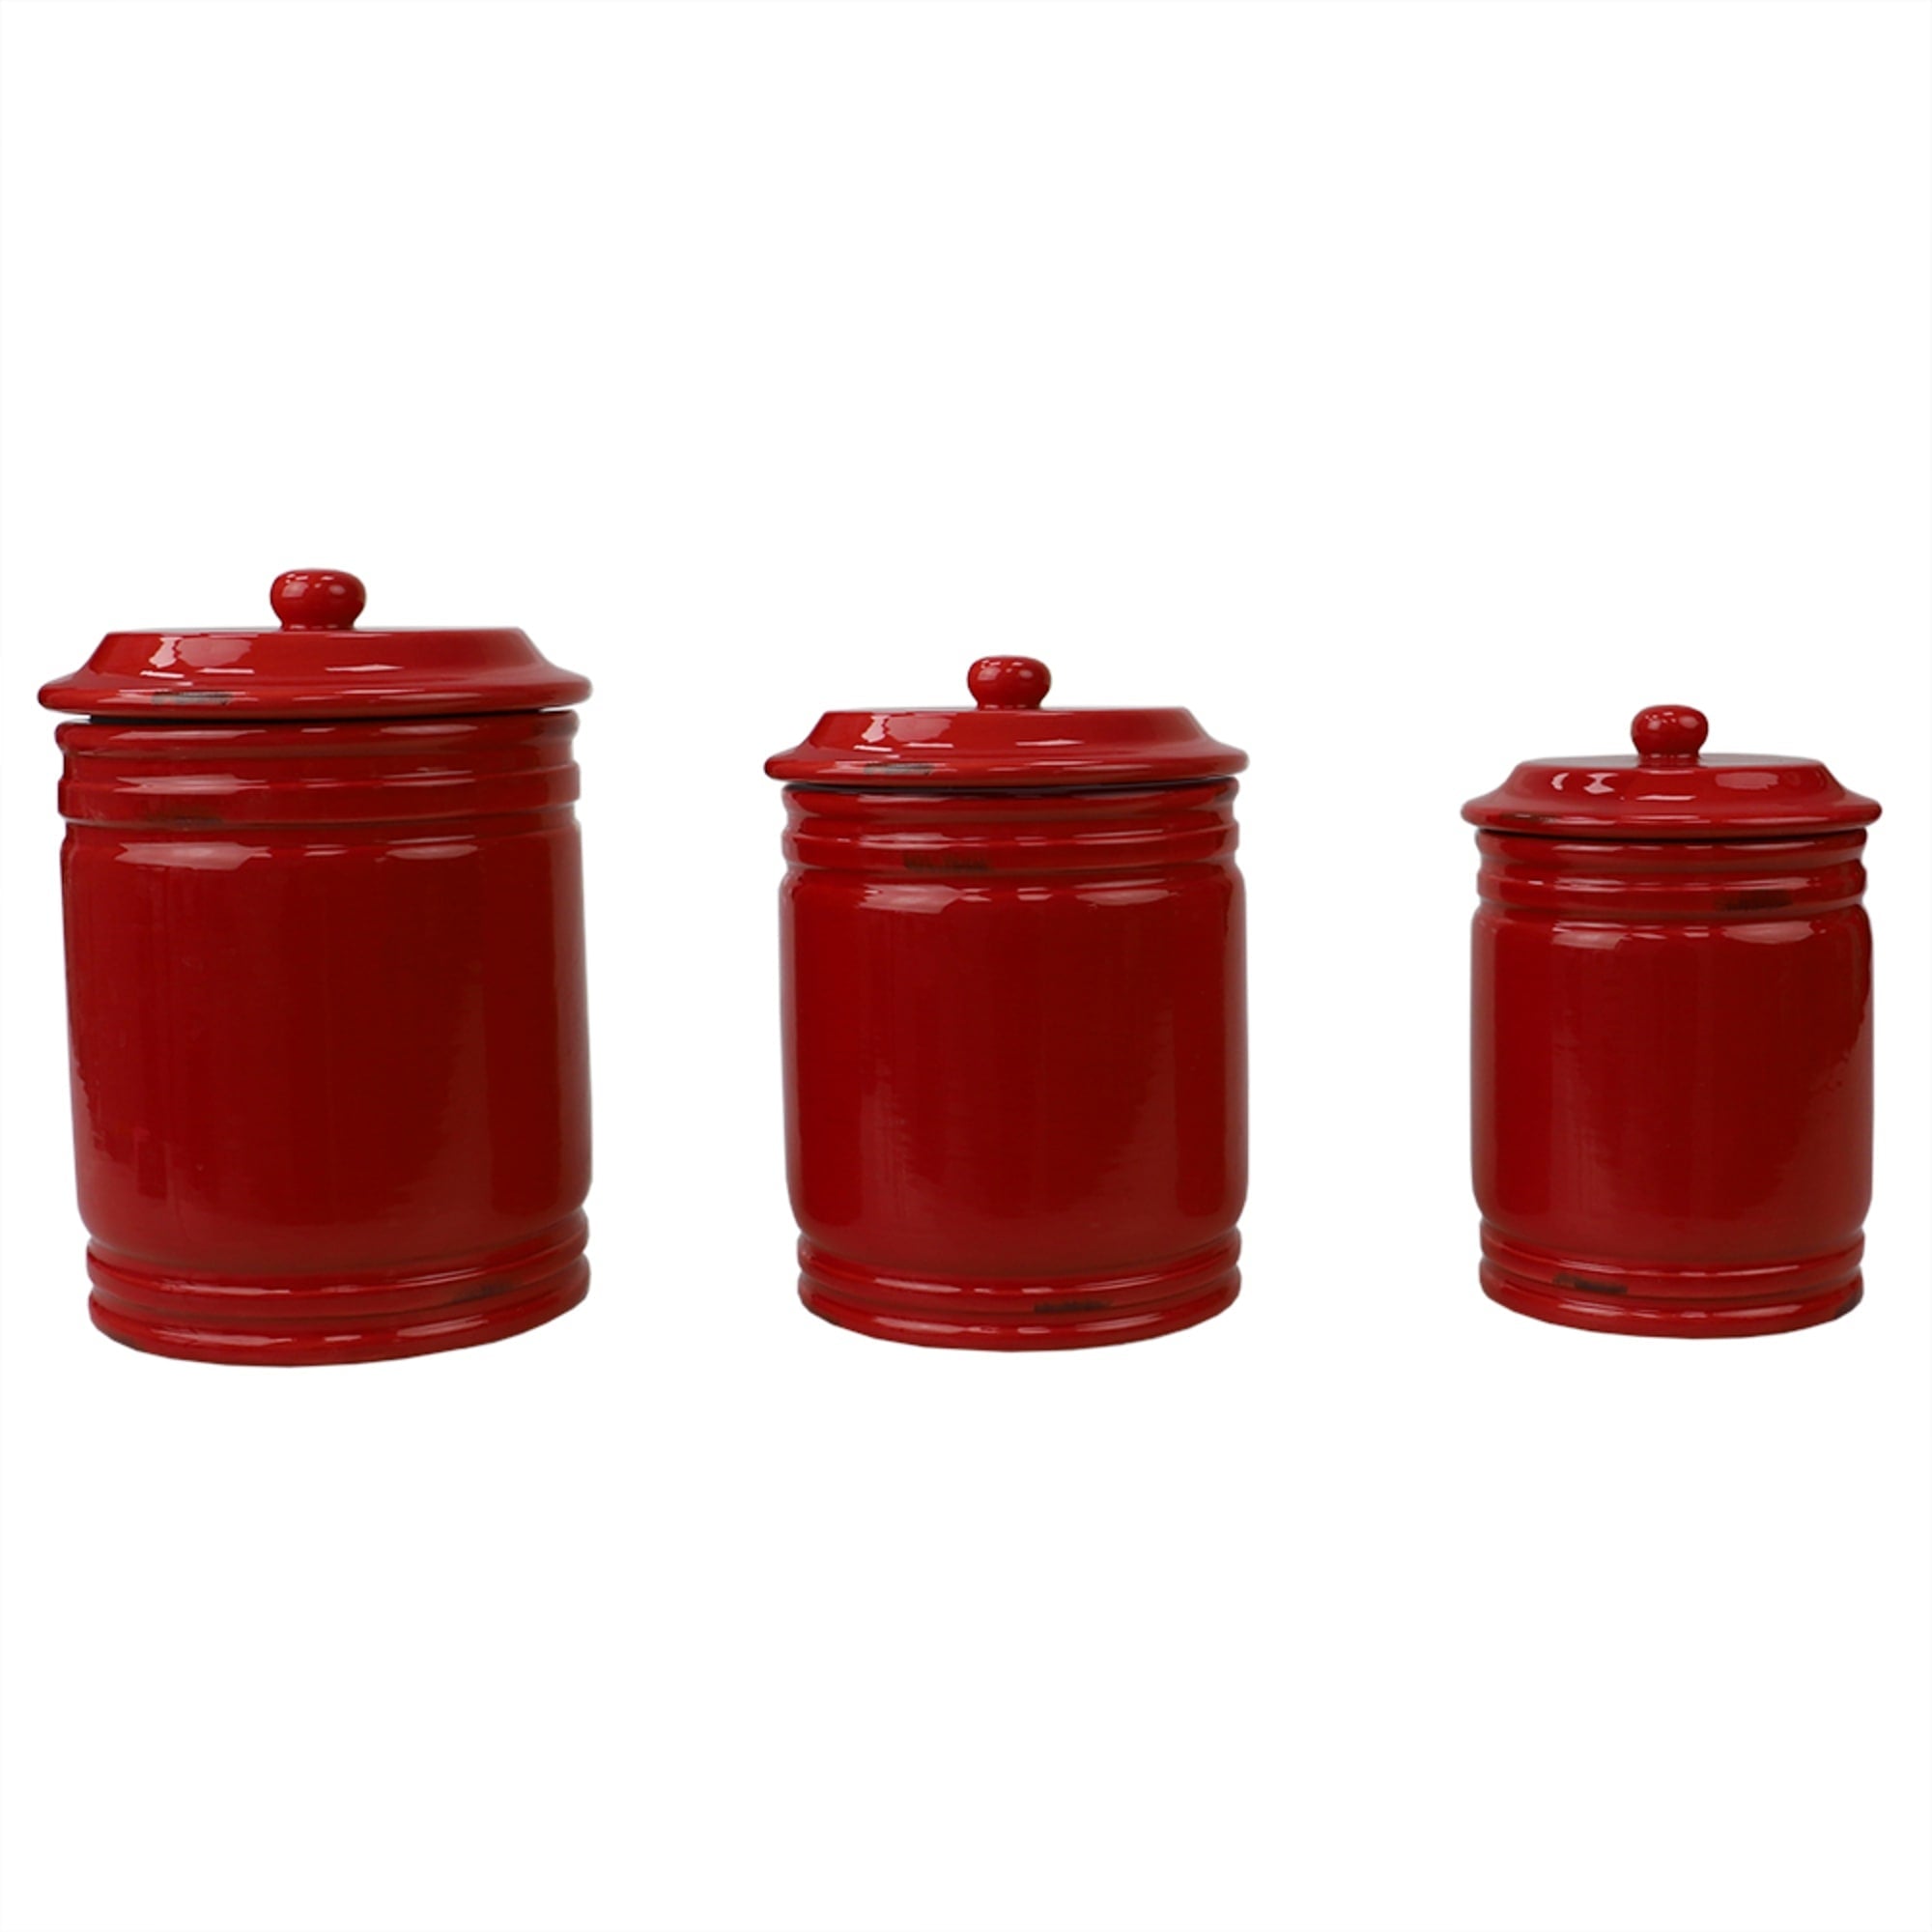 Home Basics Bella 3 Piece Ceramic Canisters, Red $20 EACH, CASE PACK OF 2